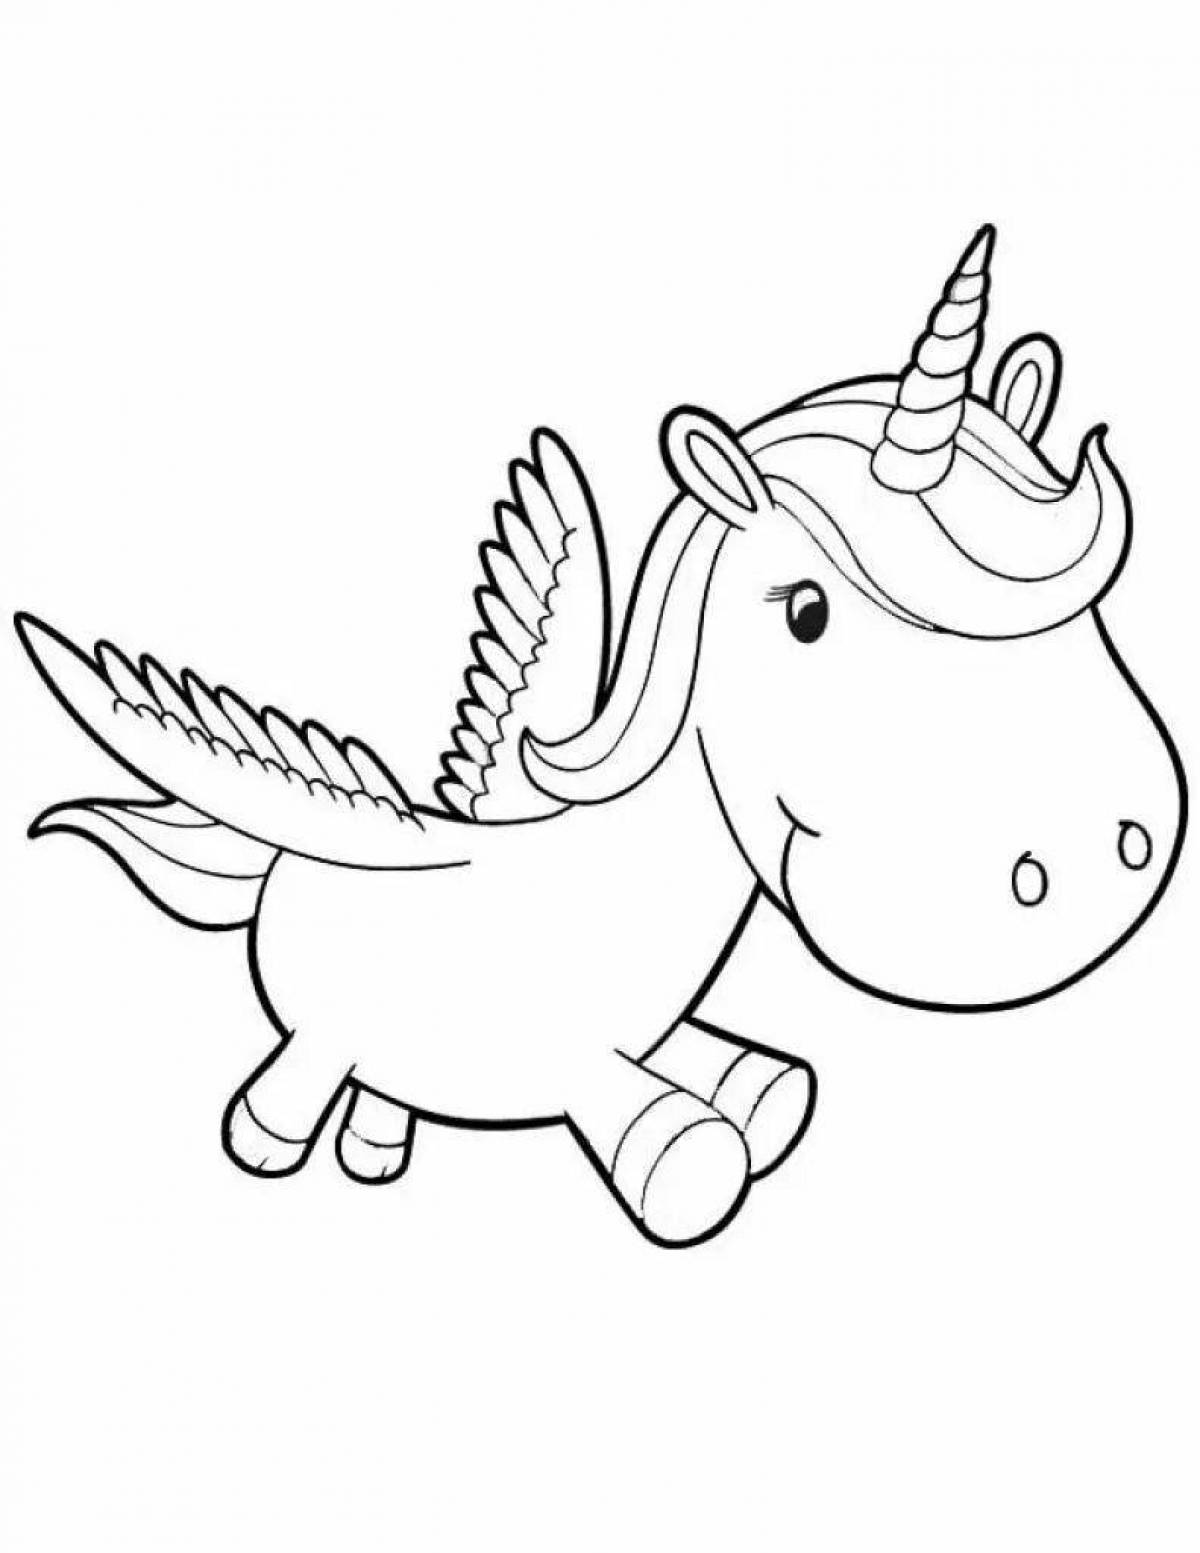 Wonderful coloring unicorn with wings for kids